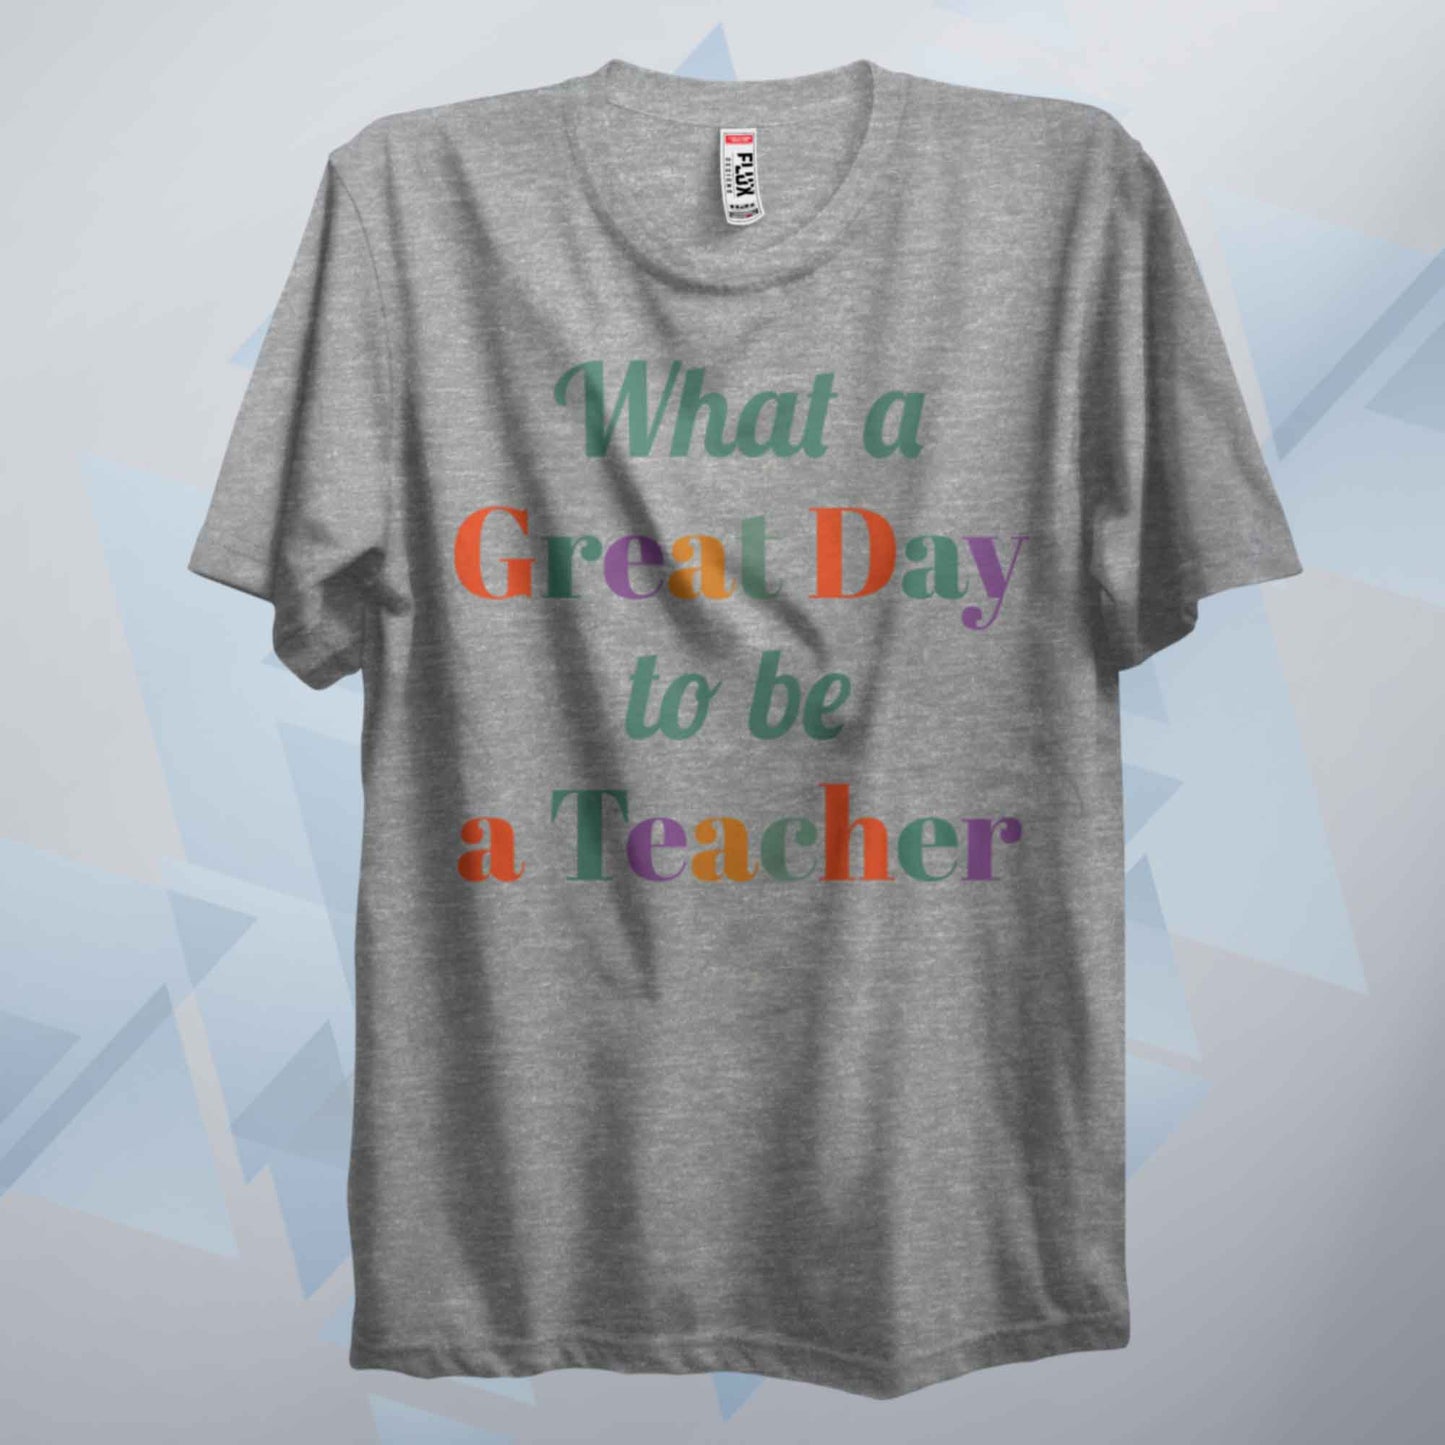 A Great Day To Be A Teacher T Shirt